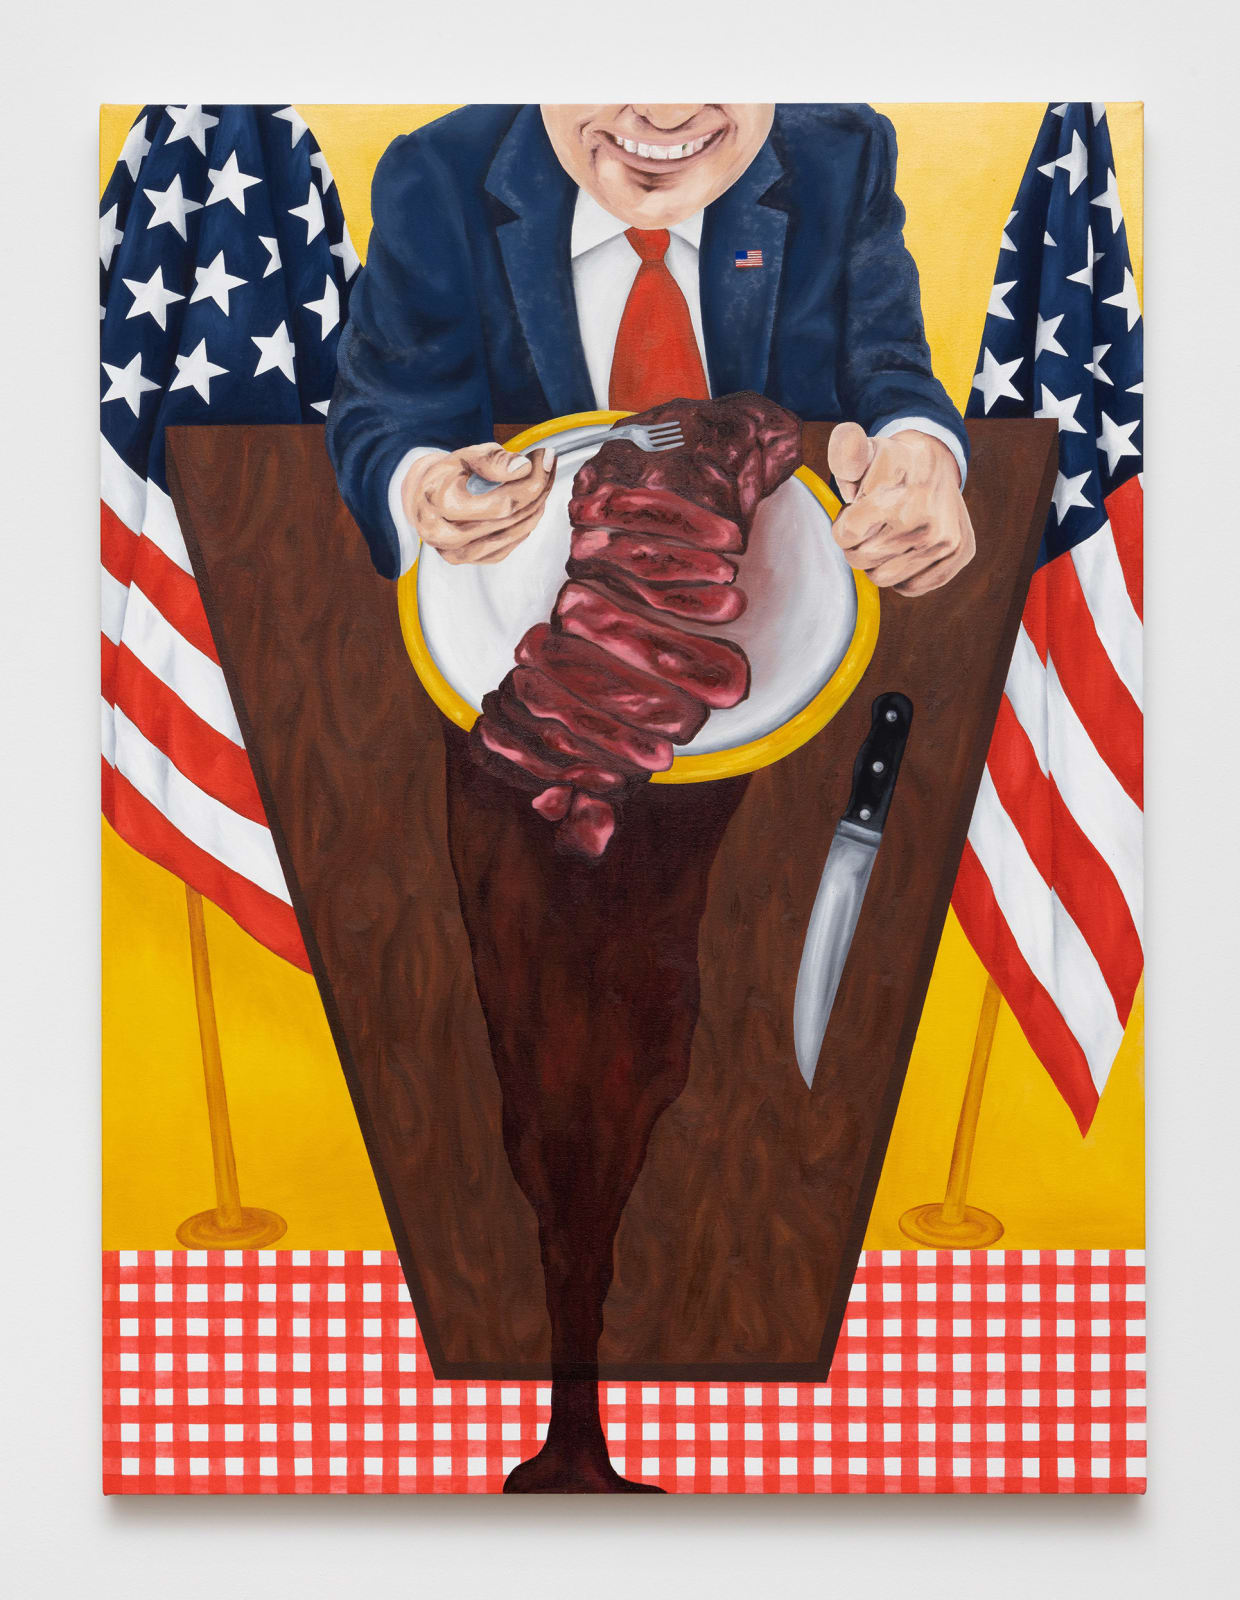 Painting showing a bird’s eye view perspective of a politician eating steak next to two American flags on top of a solid yellow and red stripes tablecloth pattern background. This perspective makes the tabletop resemble a lectern stand. 